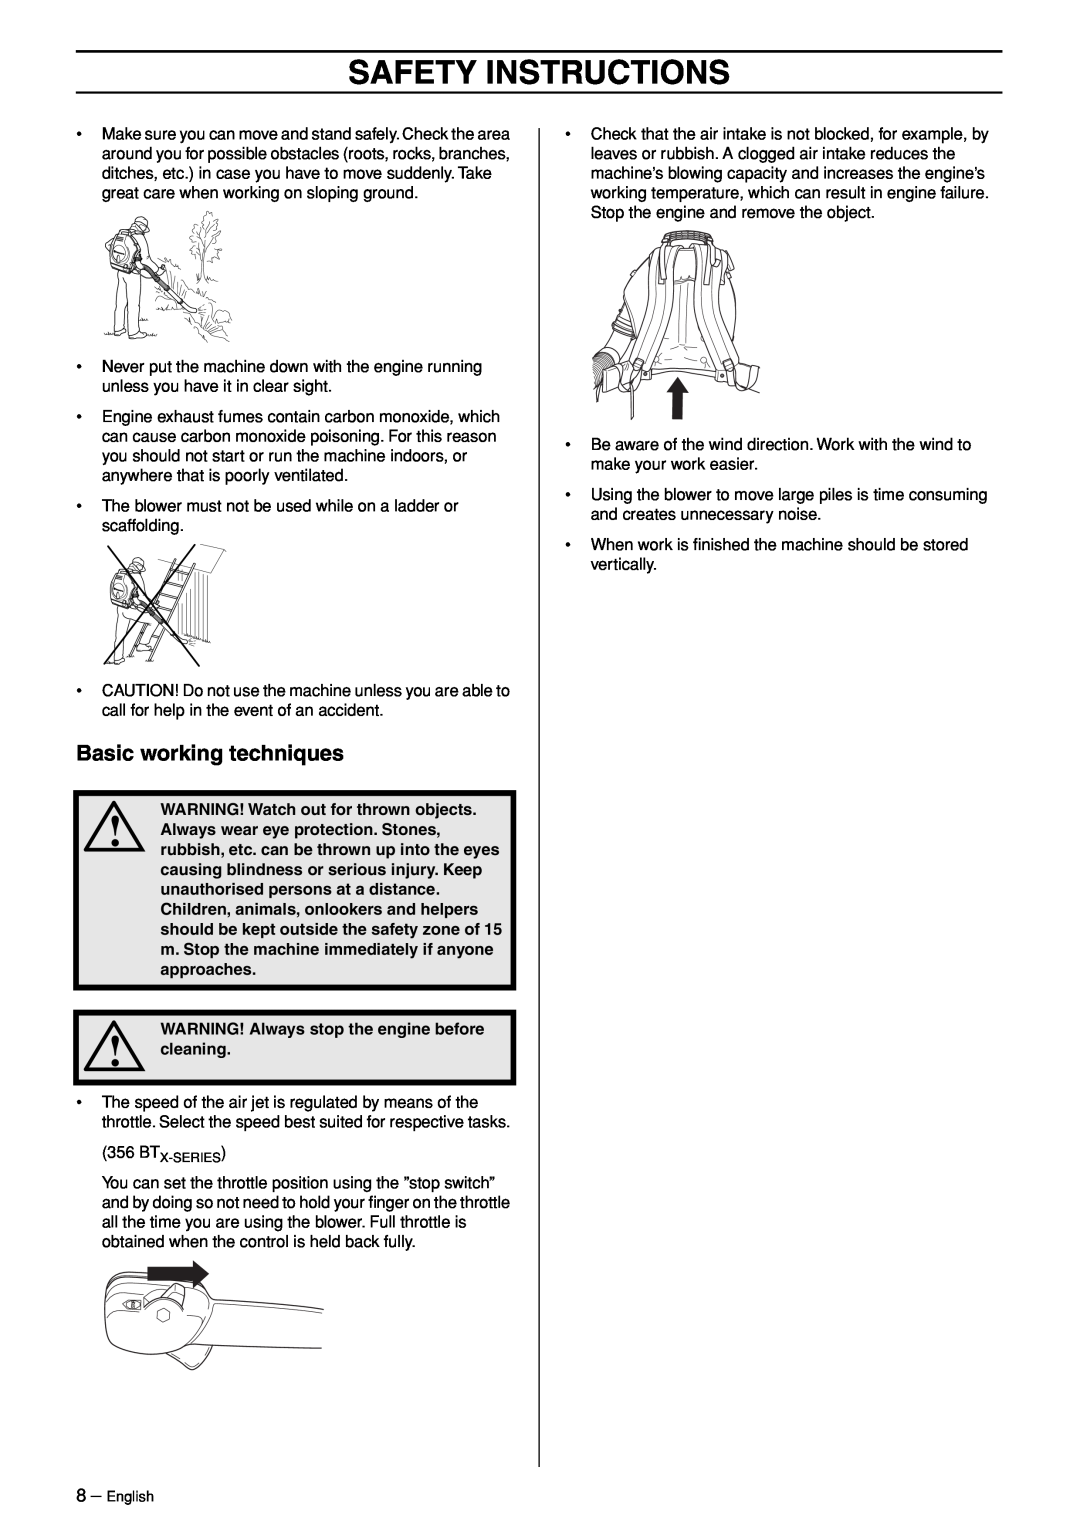 Husqvarna 356BT manual Basic working techniques, Safety Instructions, WARNING! Watch out for thrown objects 